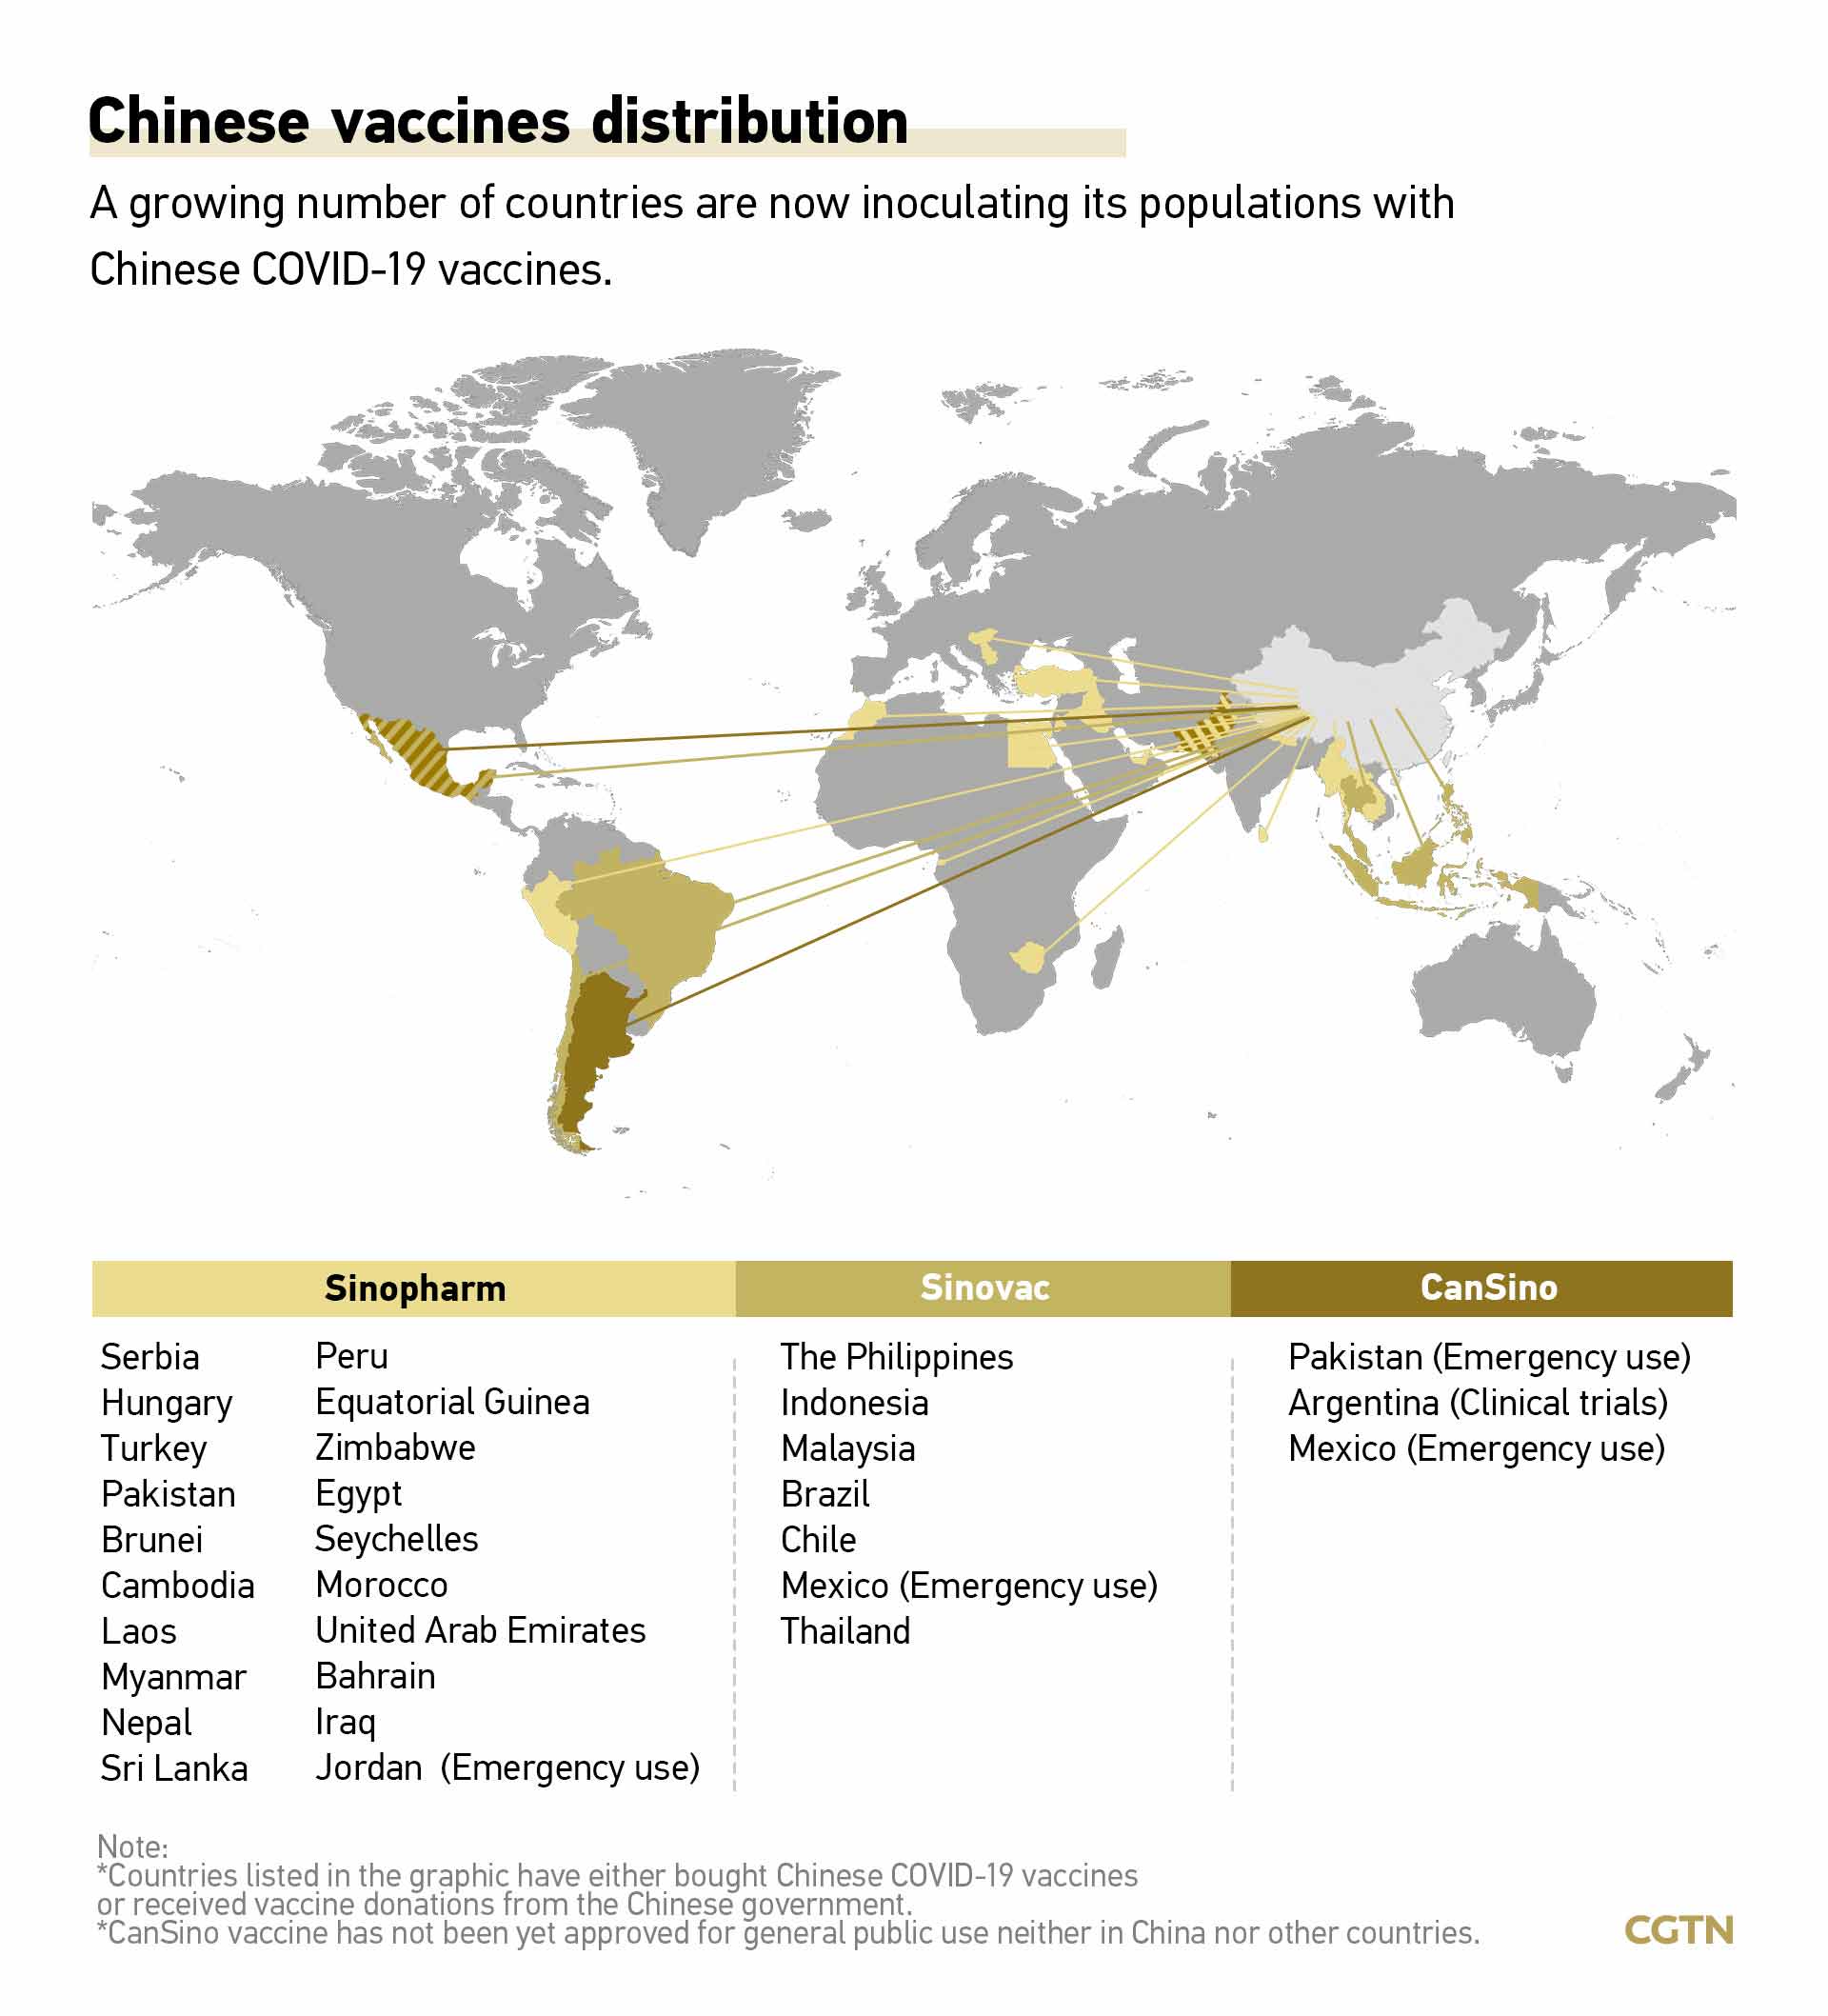 Wang Yi: World should reject vaccine nationalism, promote equitable distribution of vaccines